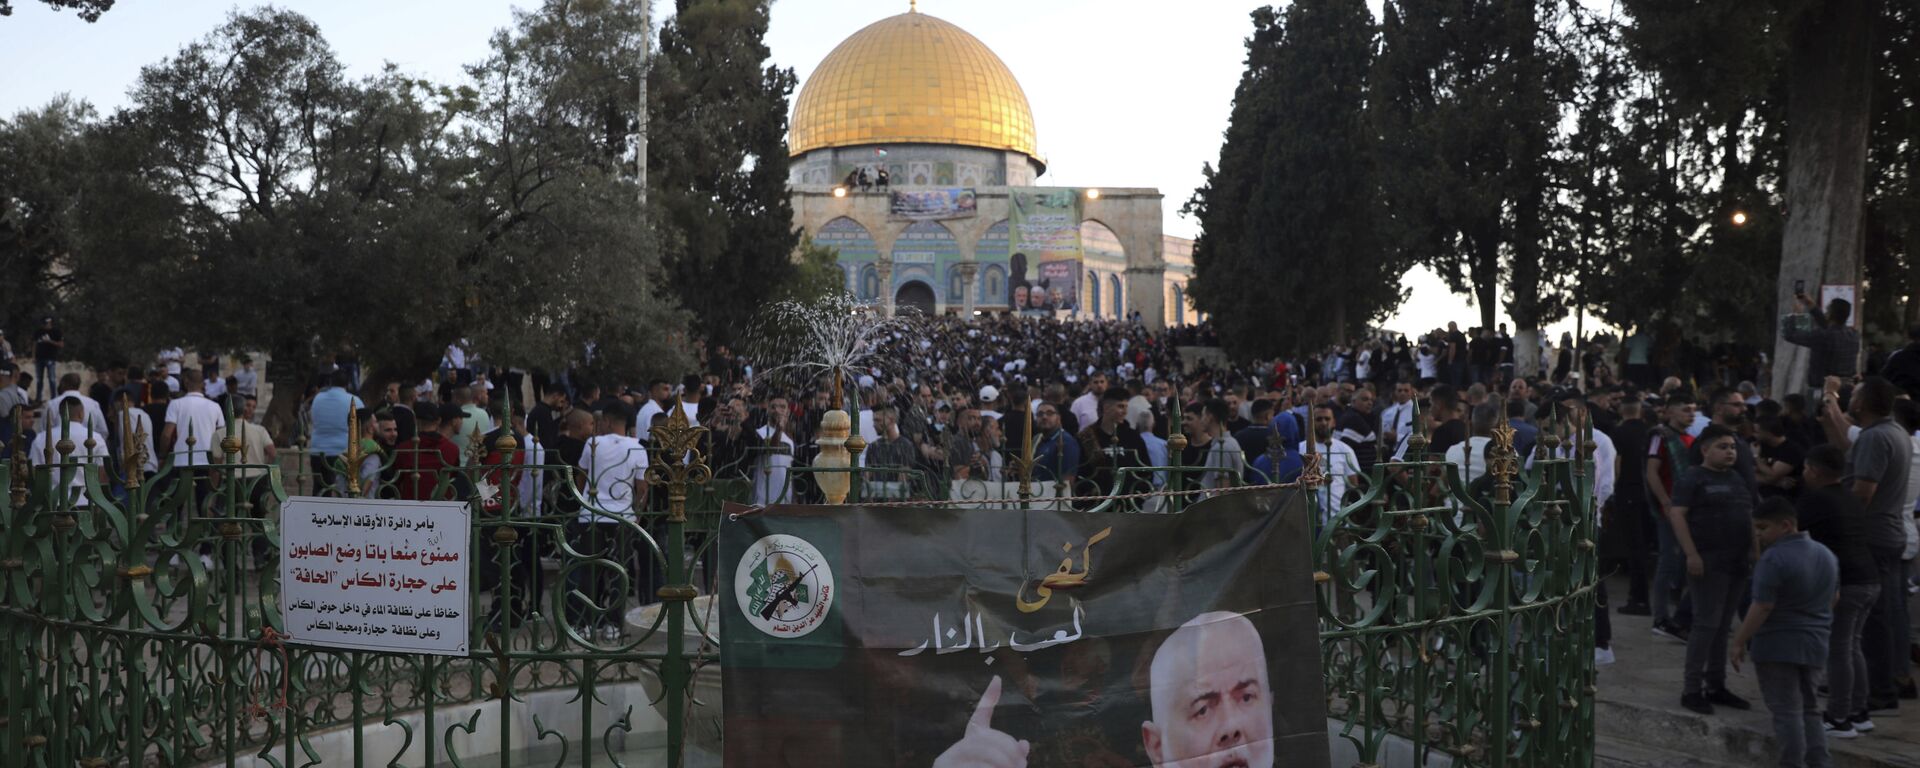 A banner depicting Hamas' supreme leader Ismail Haniyeh is on display as Muslims gather for Eid al-Fitr prayers at the Dome of the Rock Mosque in the Al-Aqsa Mosque compound in the Old City of Jerusalem, Thursday, May 13, 2021. - Sputnik International, 1920